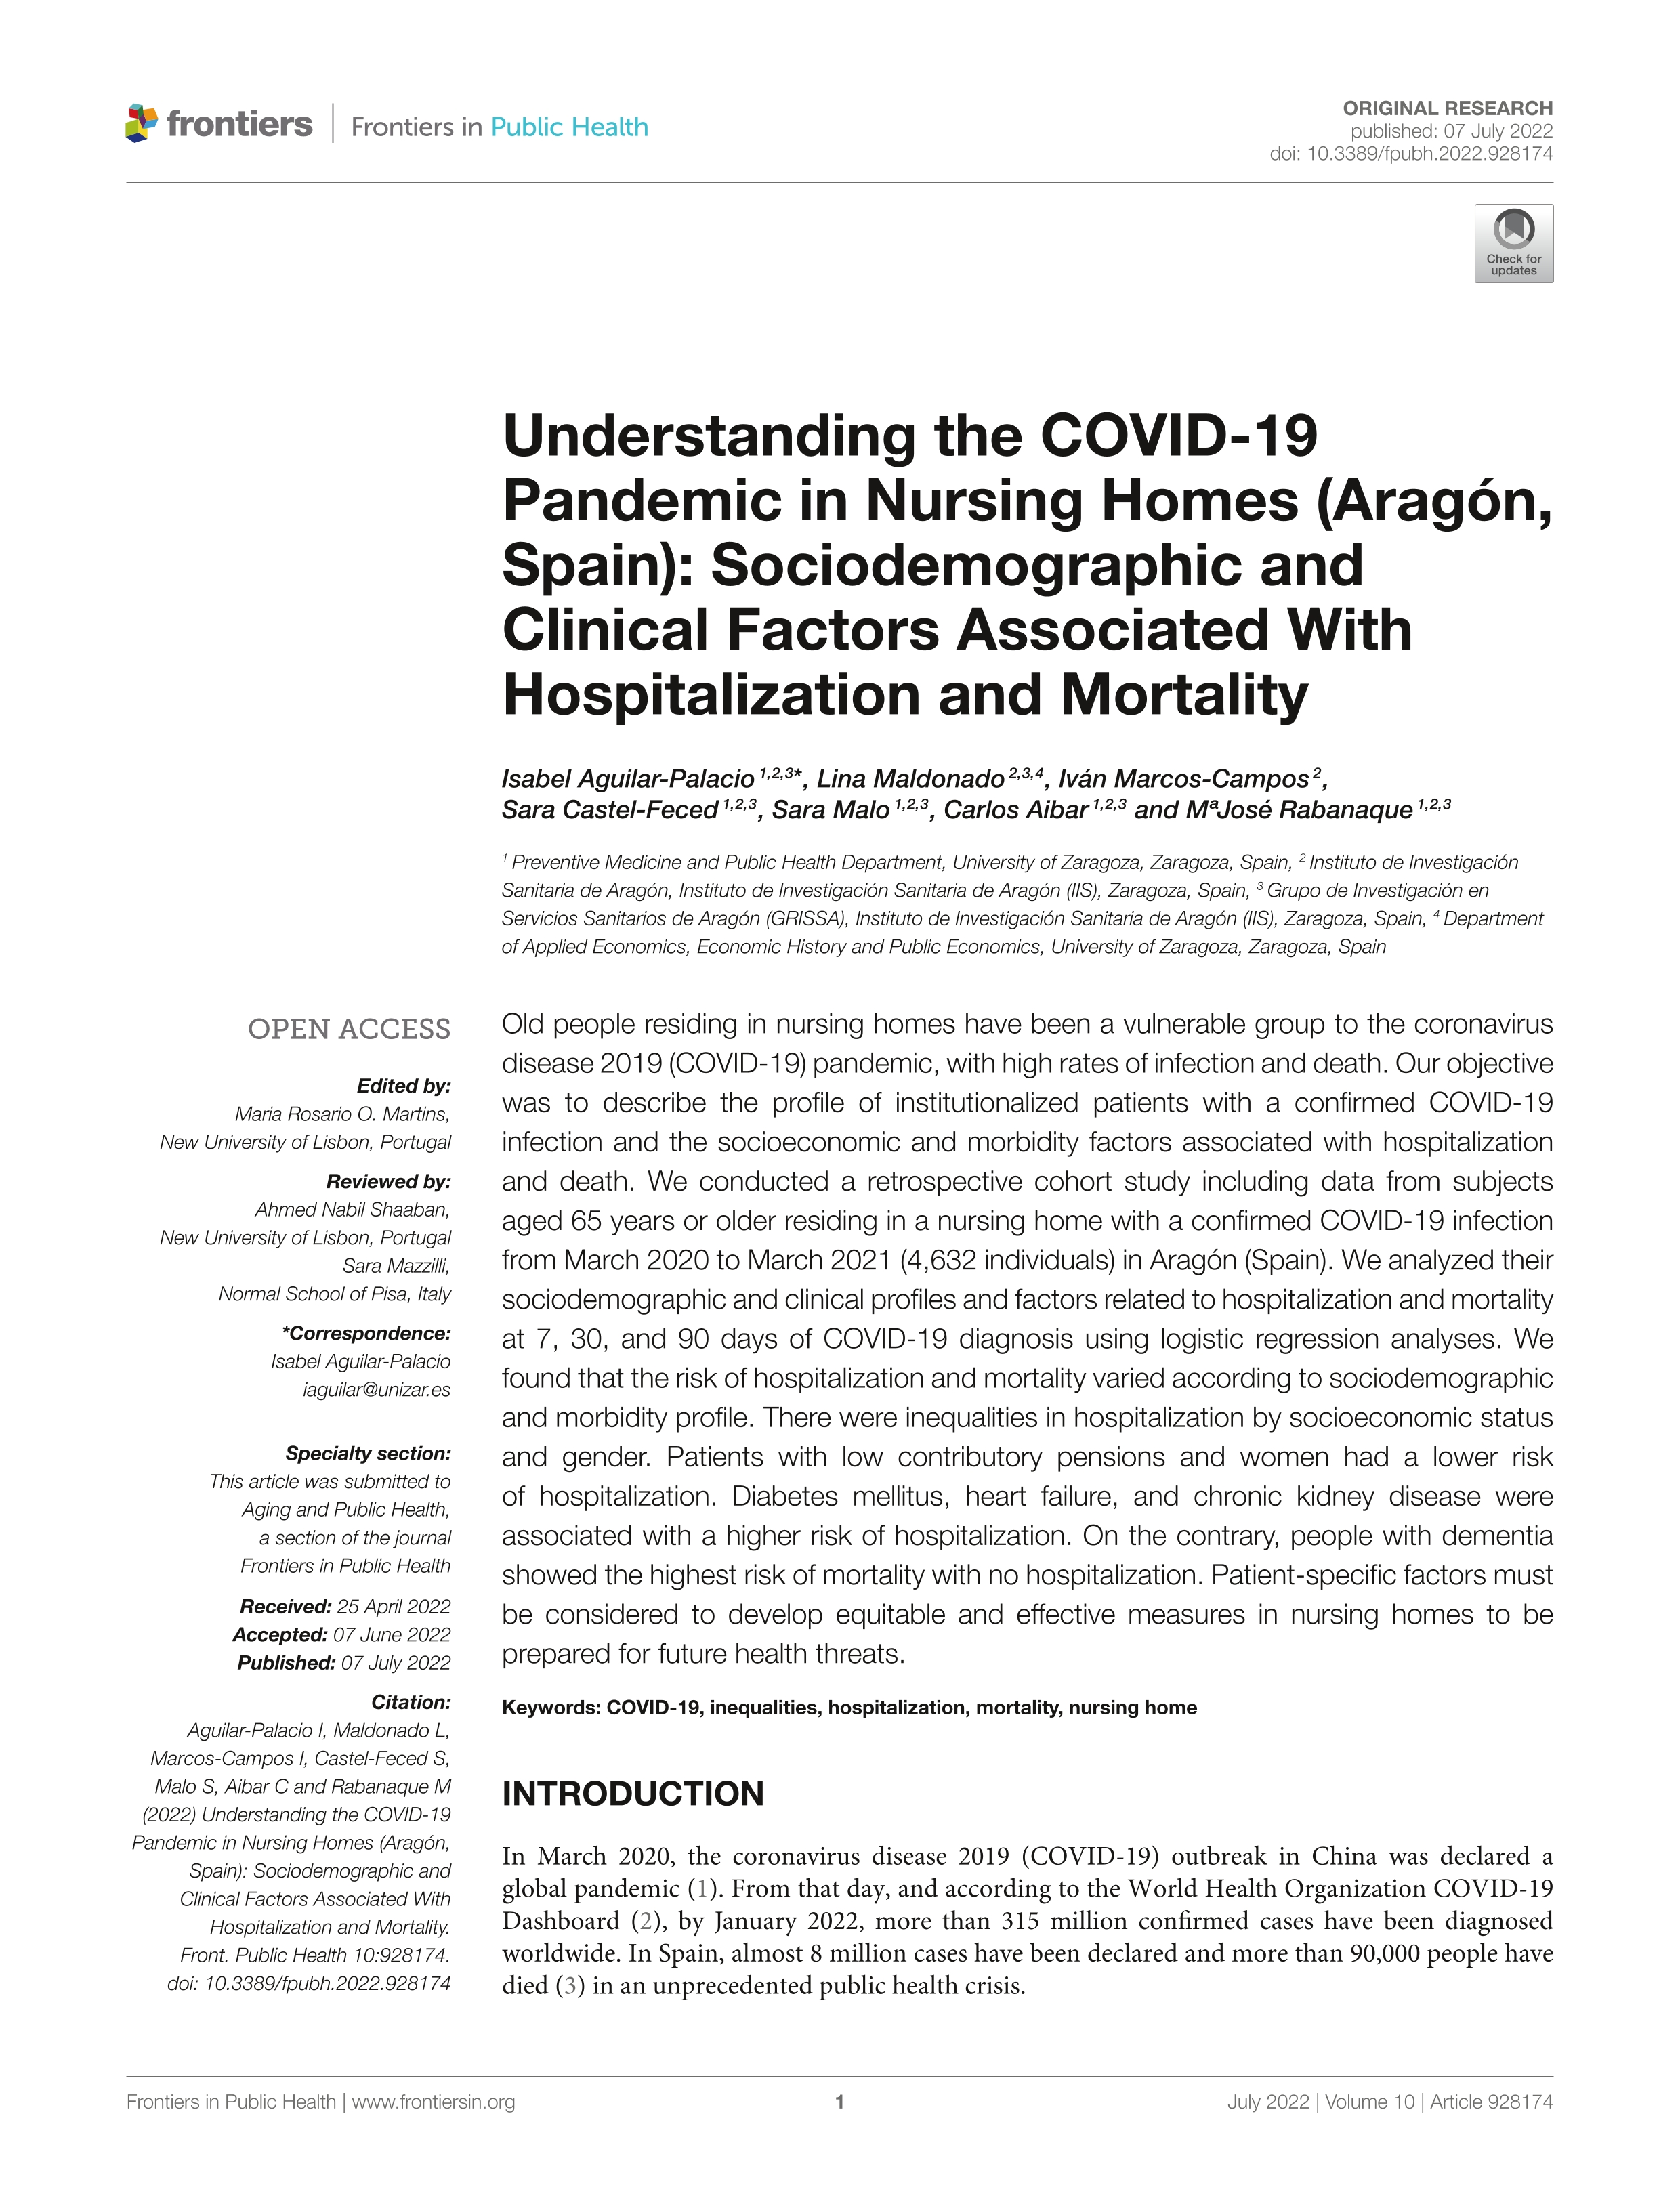 Understanding the COVID-19 pandemic in nursing homes (Aragón, Spain): sociodemographic and clinical factors associated with hospitalization and mortality